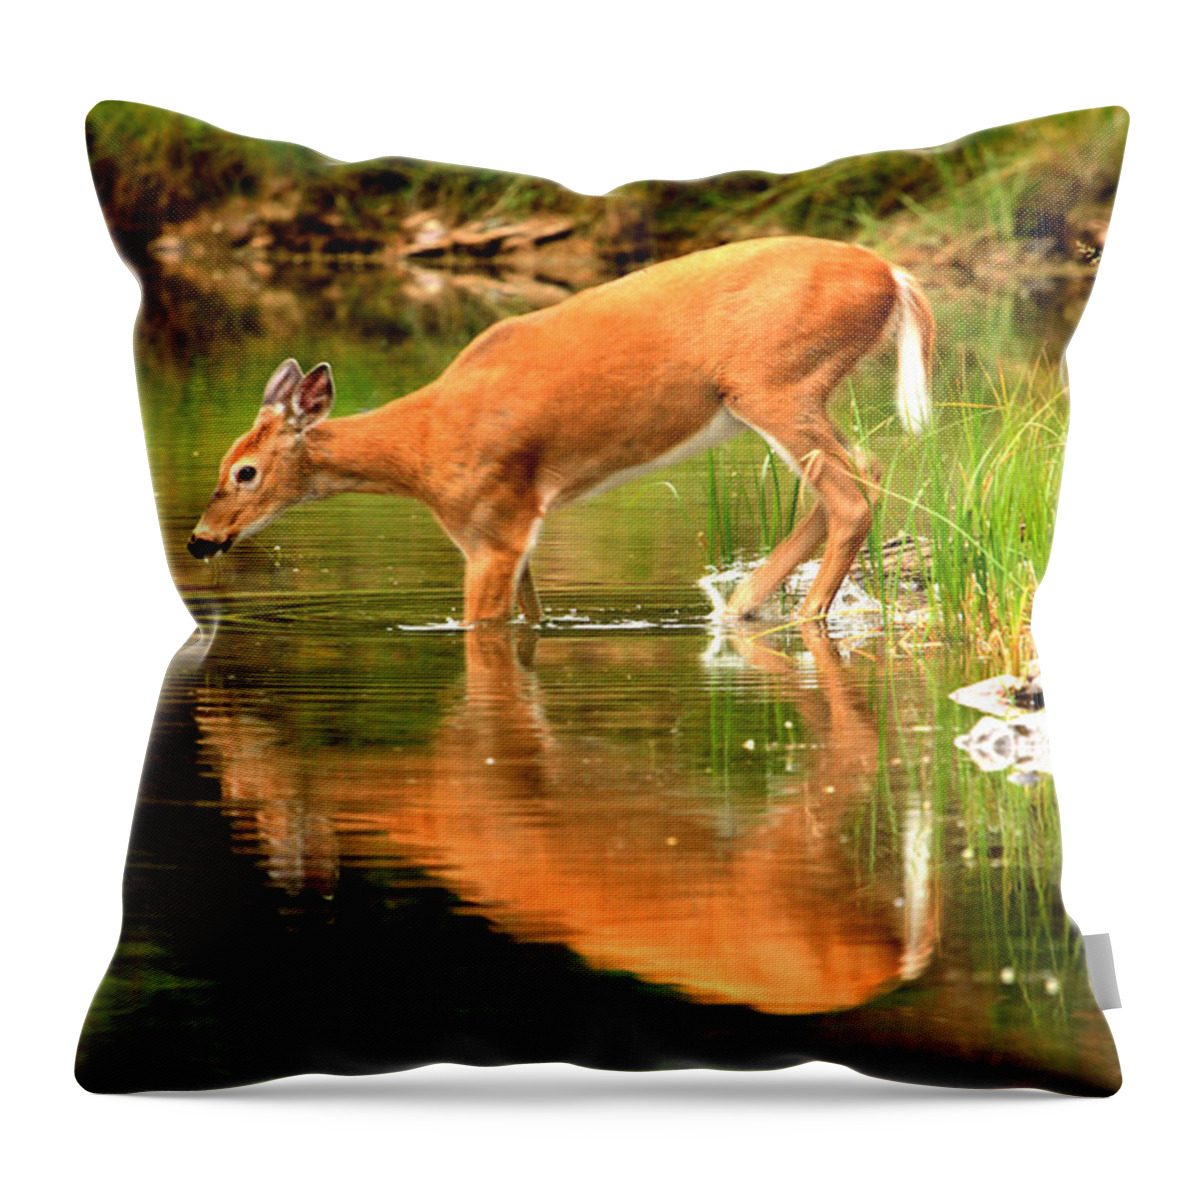 Deer Throw Pillow featuring the photograph Eating Off The Bottom Of Fishercap by Adam Jewell